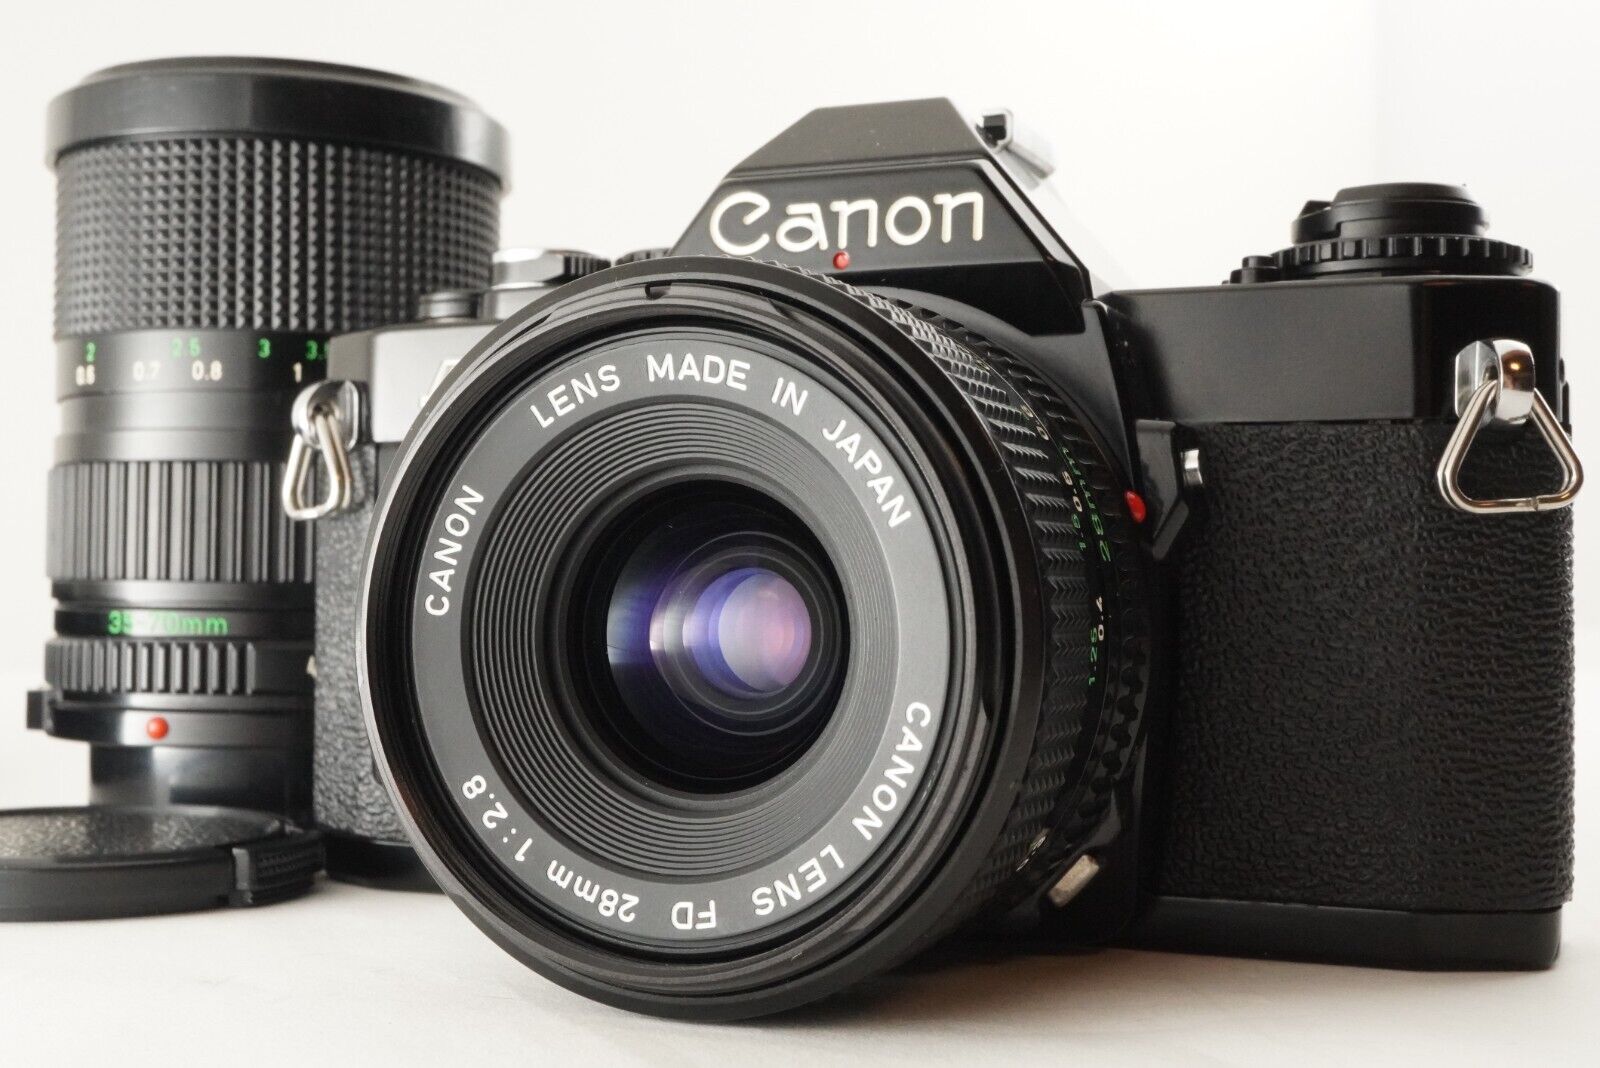 CANON – ALL FOR ONE CAMERA